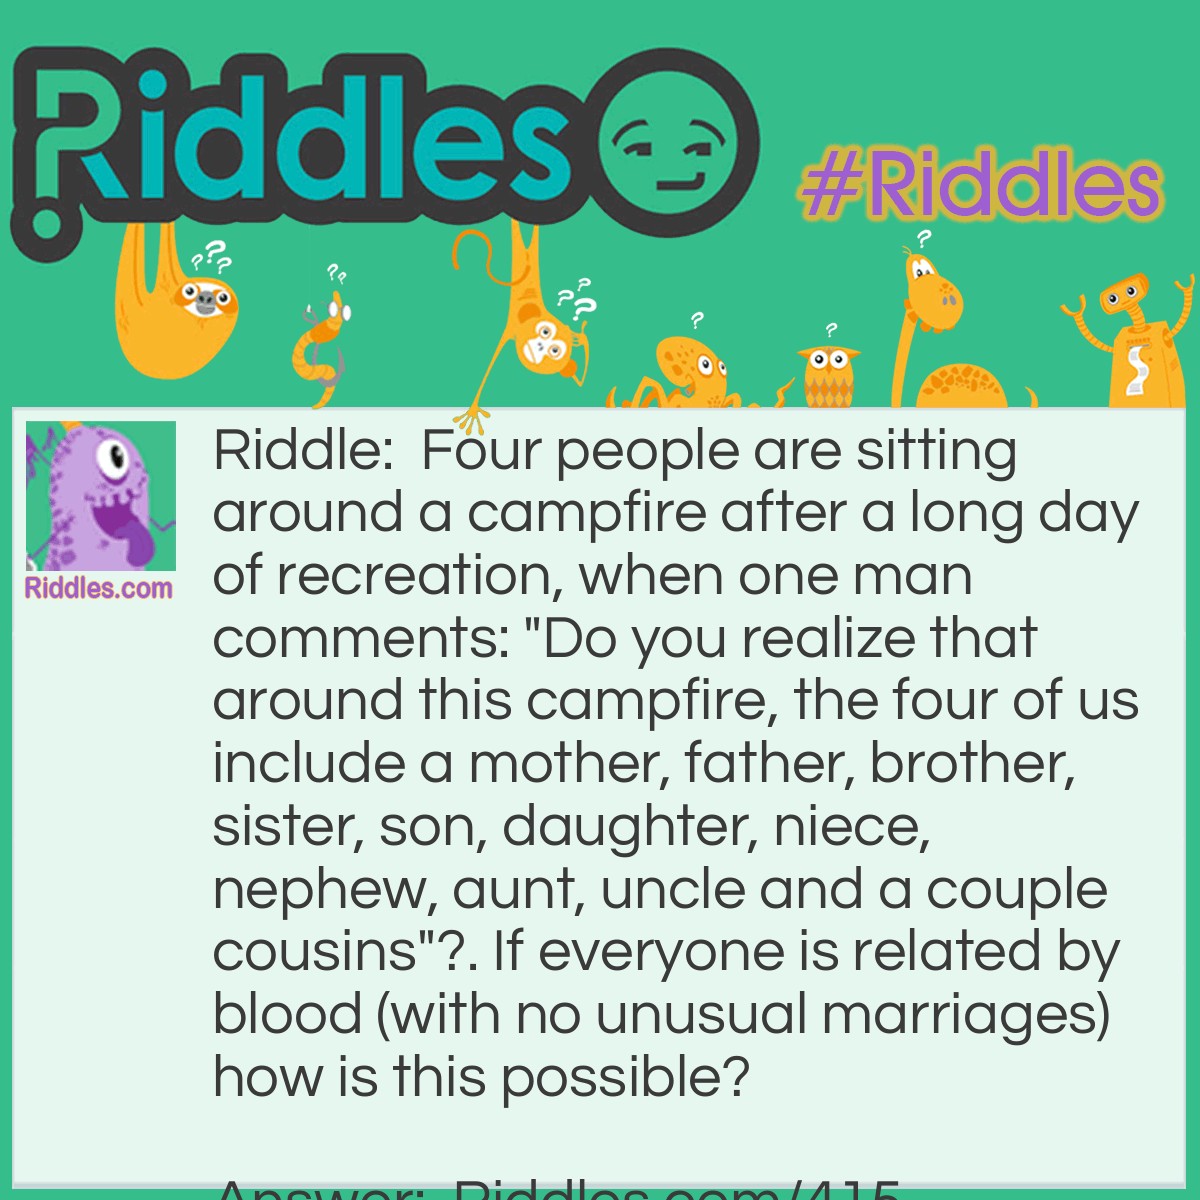 Riddle: Four people are sitting around a campfire after a long day of recreation when one man comments: "Do you realize that around this campfire, the four of us include a mother, father, brother, sister, son, daughter, niece, nephew, aunt, uncle and a couple of cousins"?. If everyone is related by blood (with no unusual marriages) how is this possible? Answer: The campfire circle includes a woman and her brother. The woman's daughter and the man's son are also present.